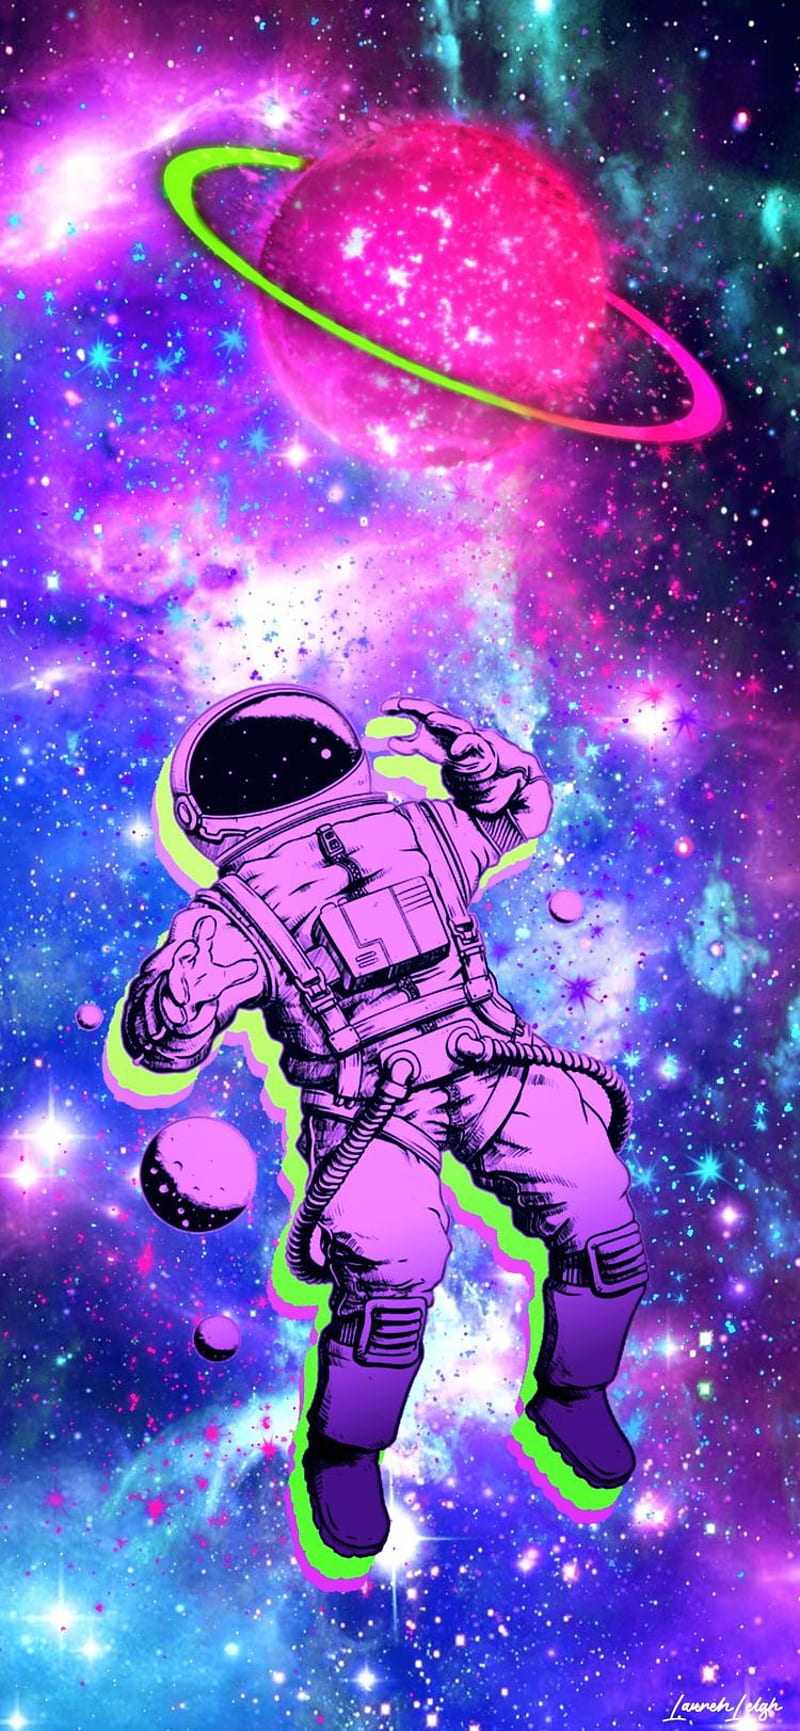 Download wallpaper 1440x2560 astronaut spacesuit earth planet art qhd  samsung galaxy s6 s7 edge note lg g4 hd background